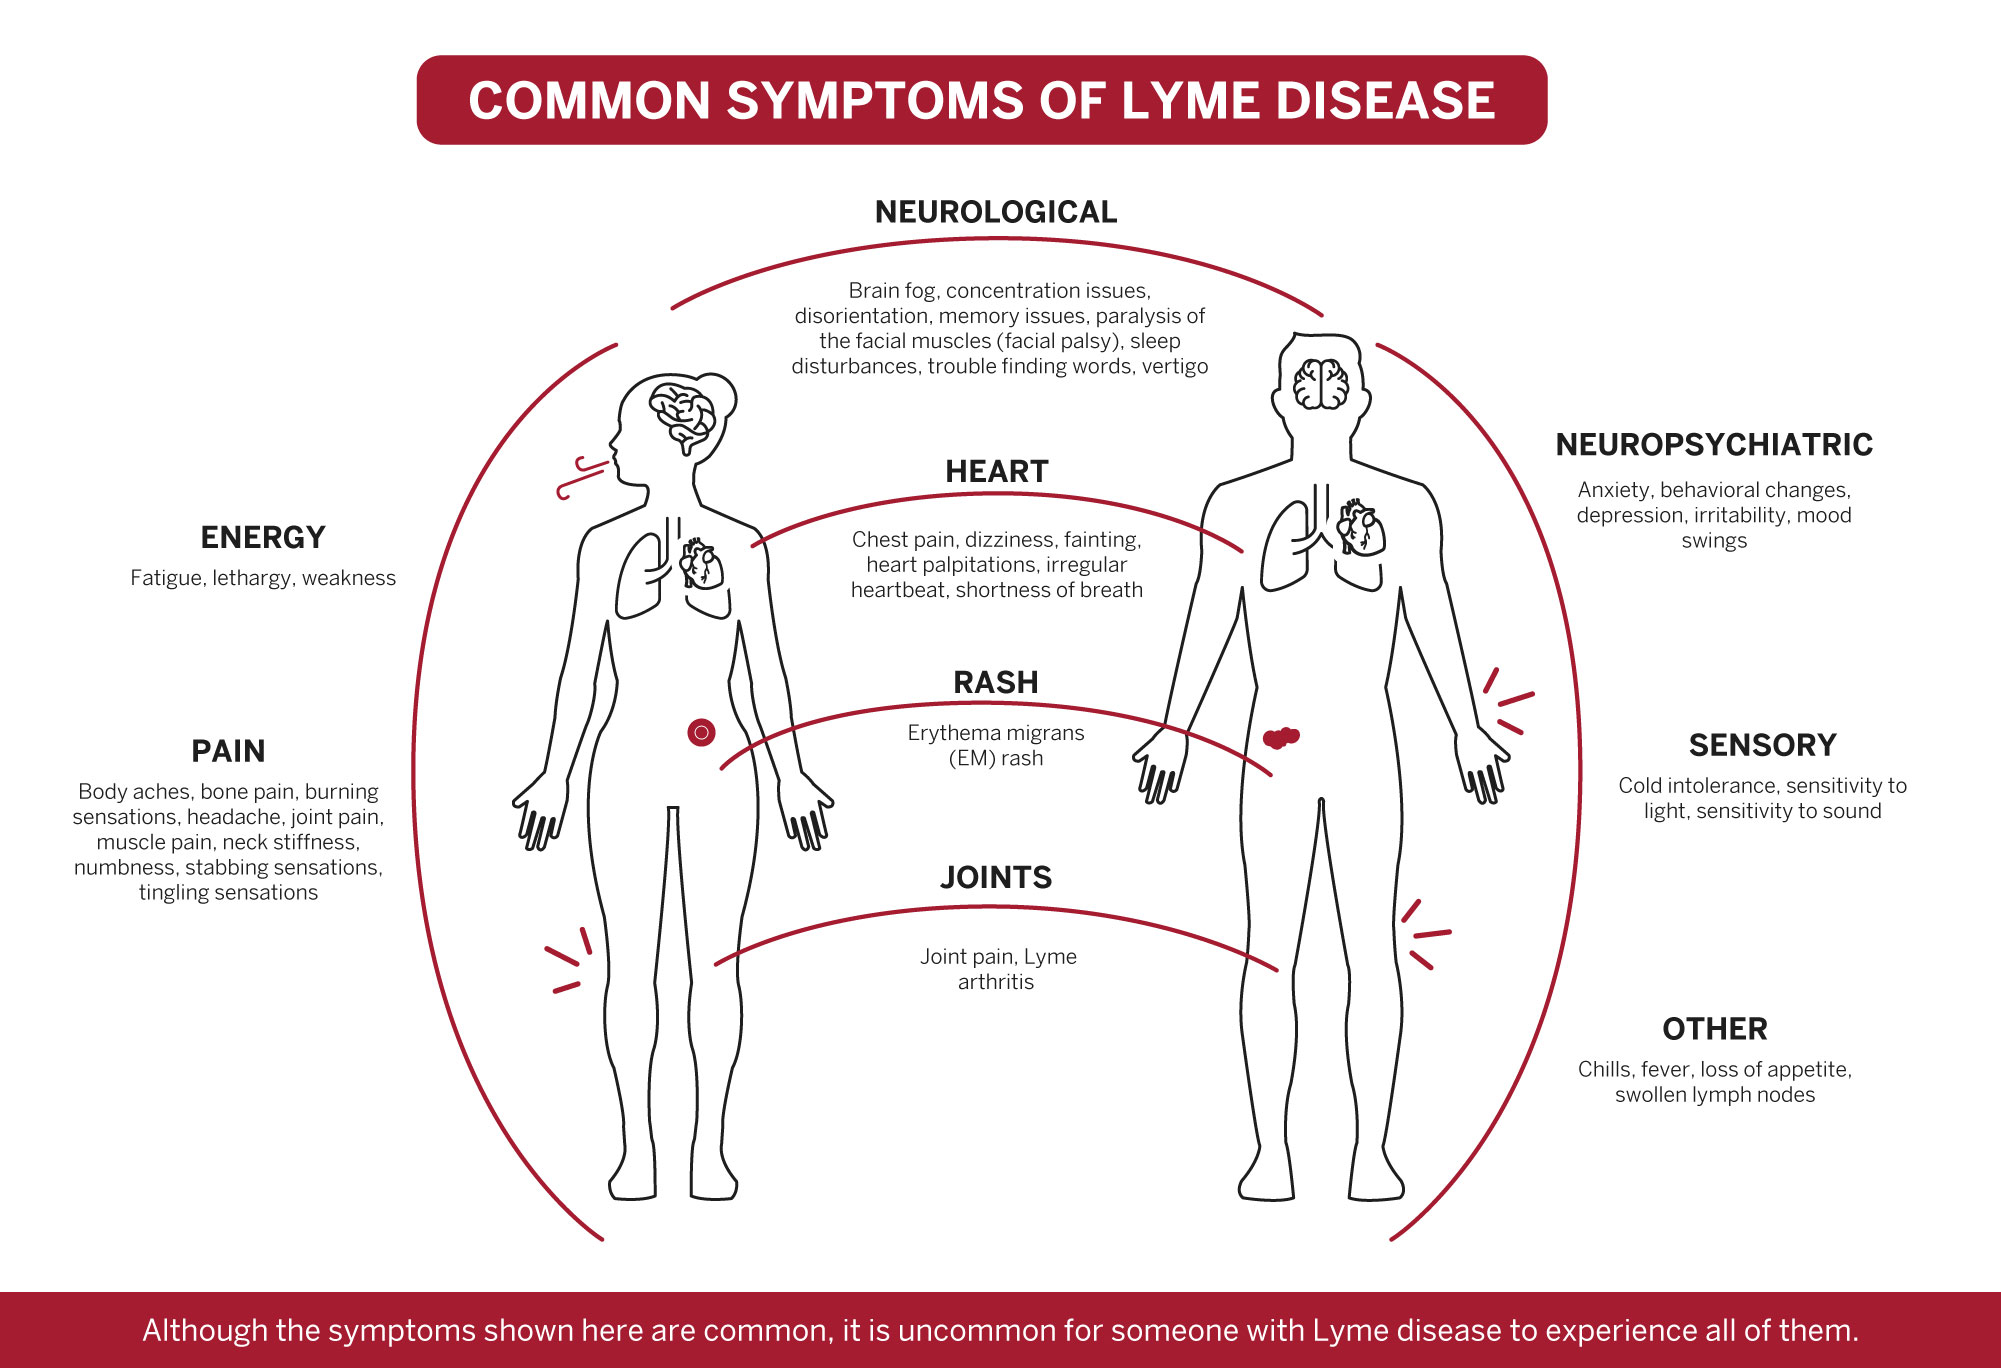 Infographic of Lyme symptoms grouped throughout the body.
Image credit: HMS